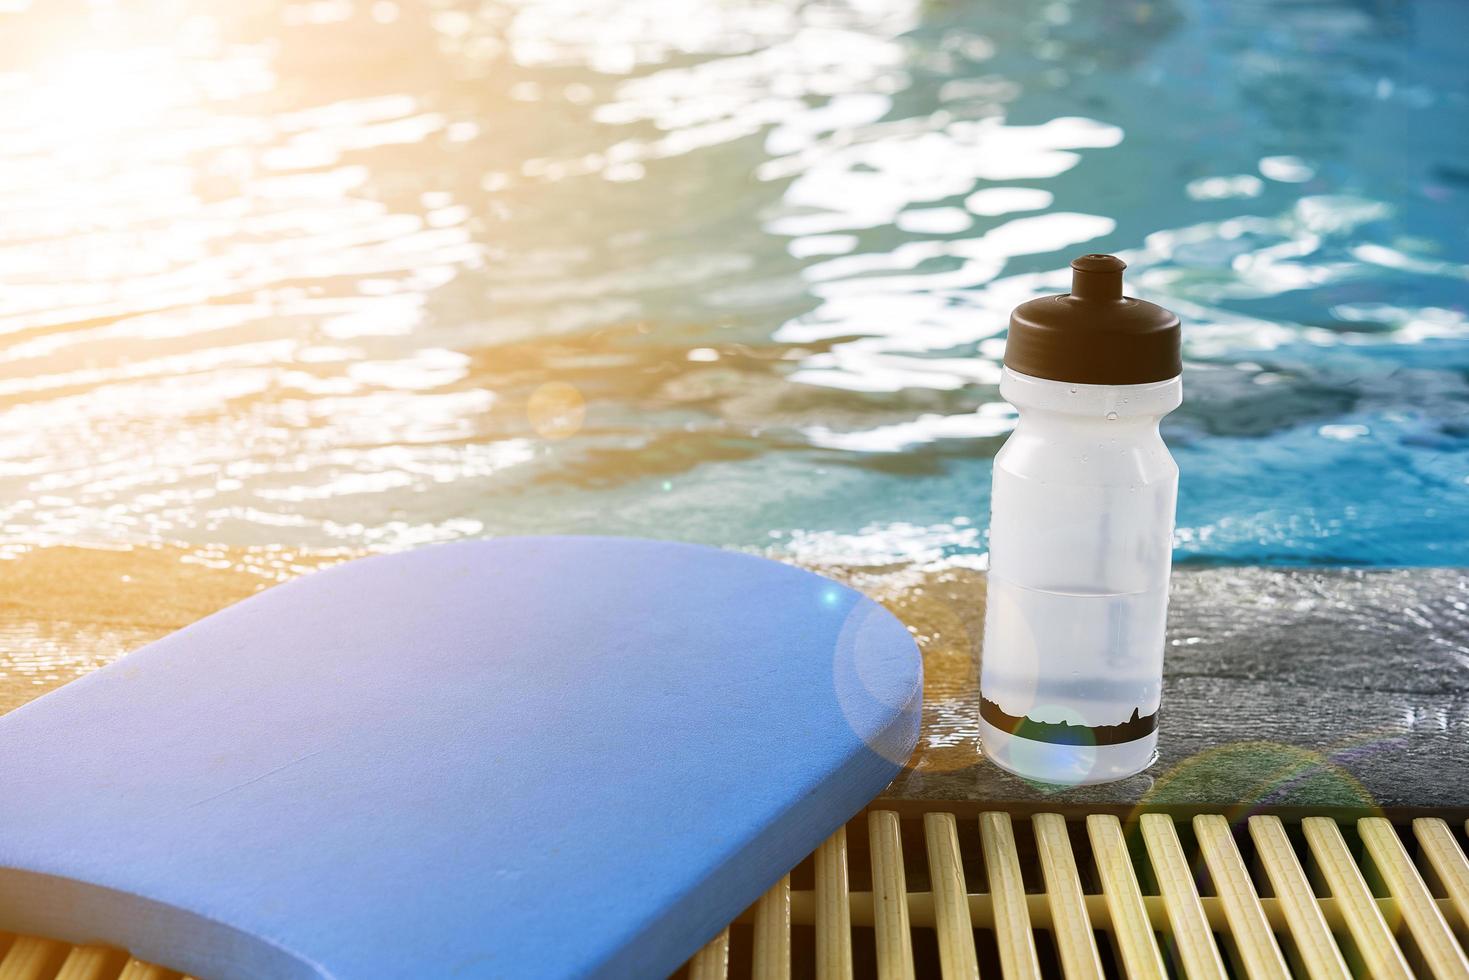 Kick board and water bottle on a swimming pool photo